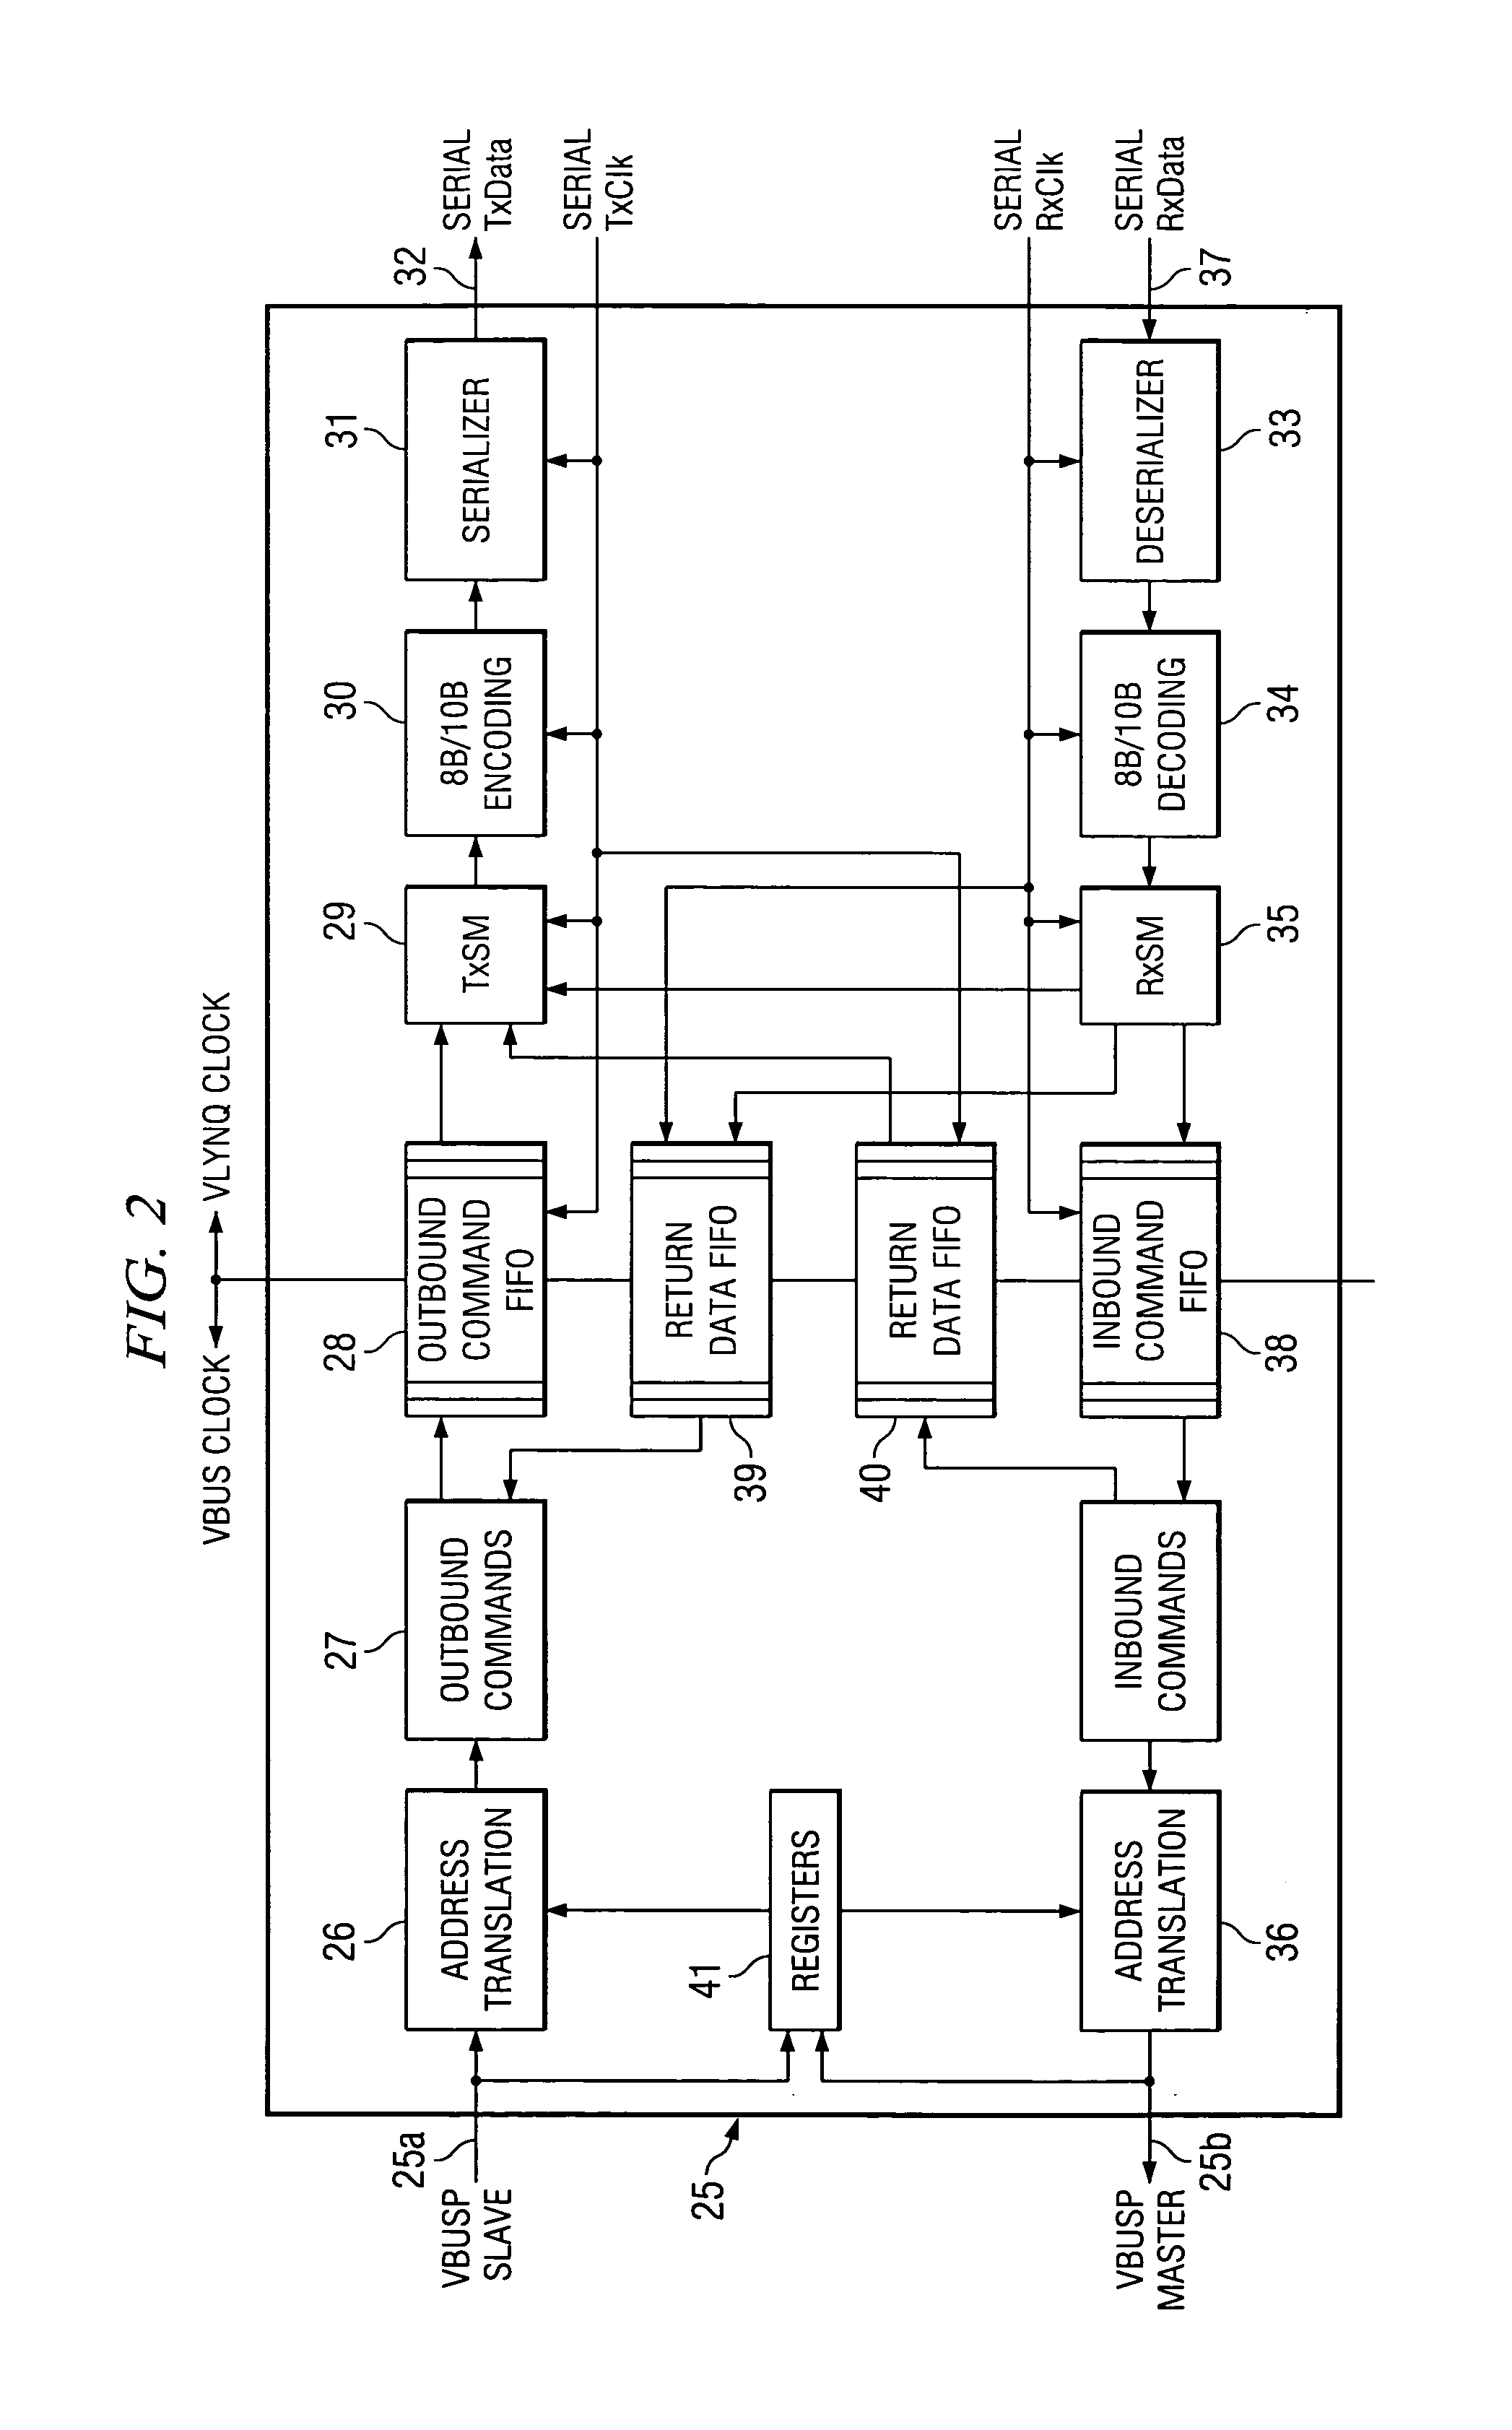 Communications interface for enabling extension of an internal common bus architecture (CBA)